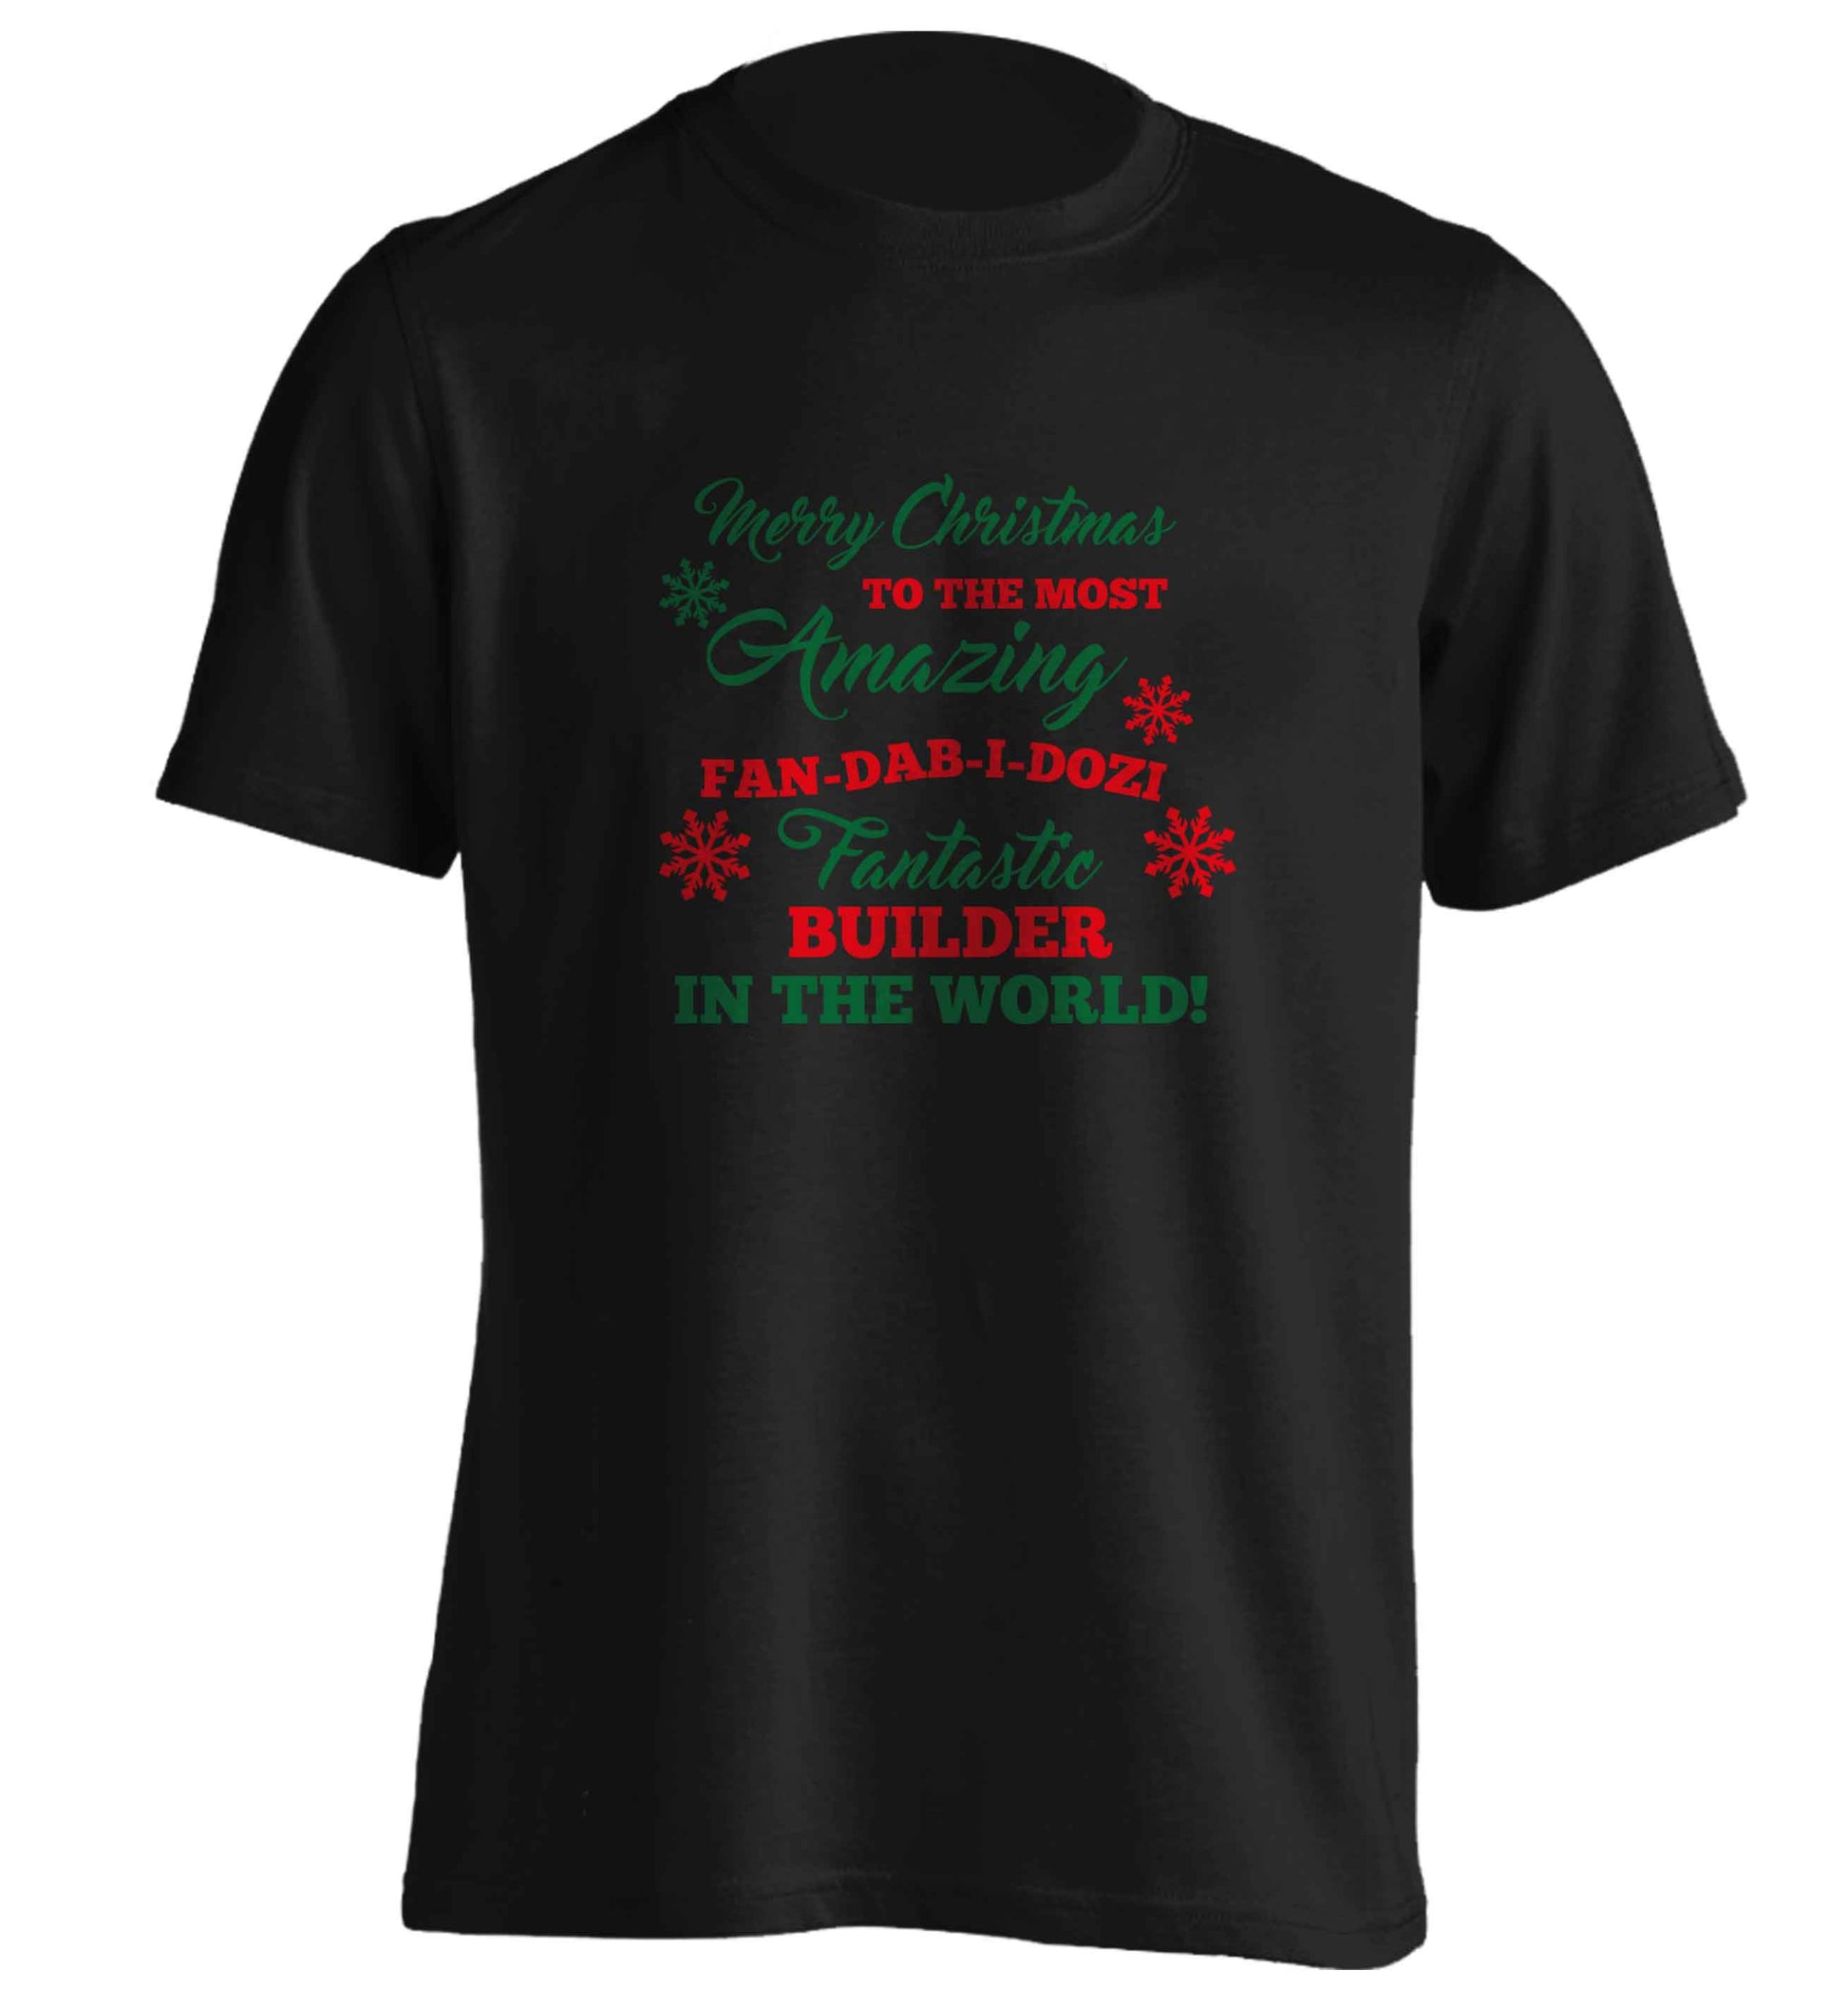 Merry Christmas to the most amazing builder in the world! adults unisex black Tshirt 2XL